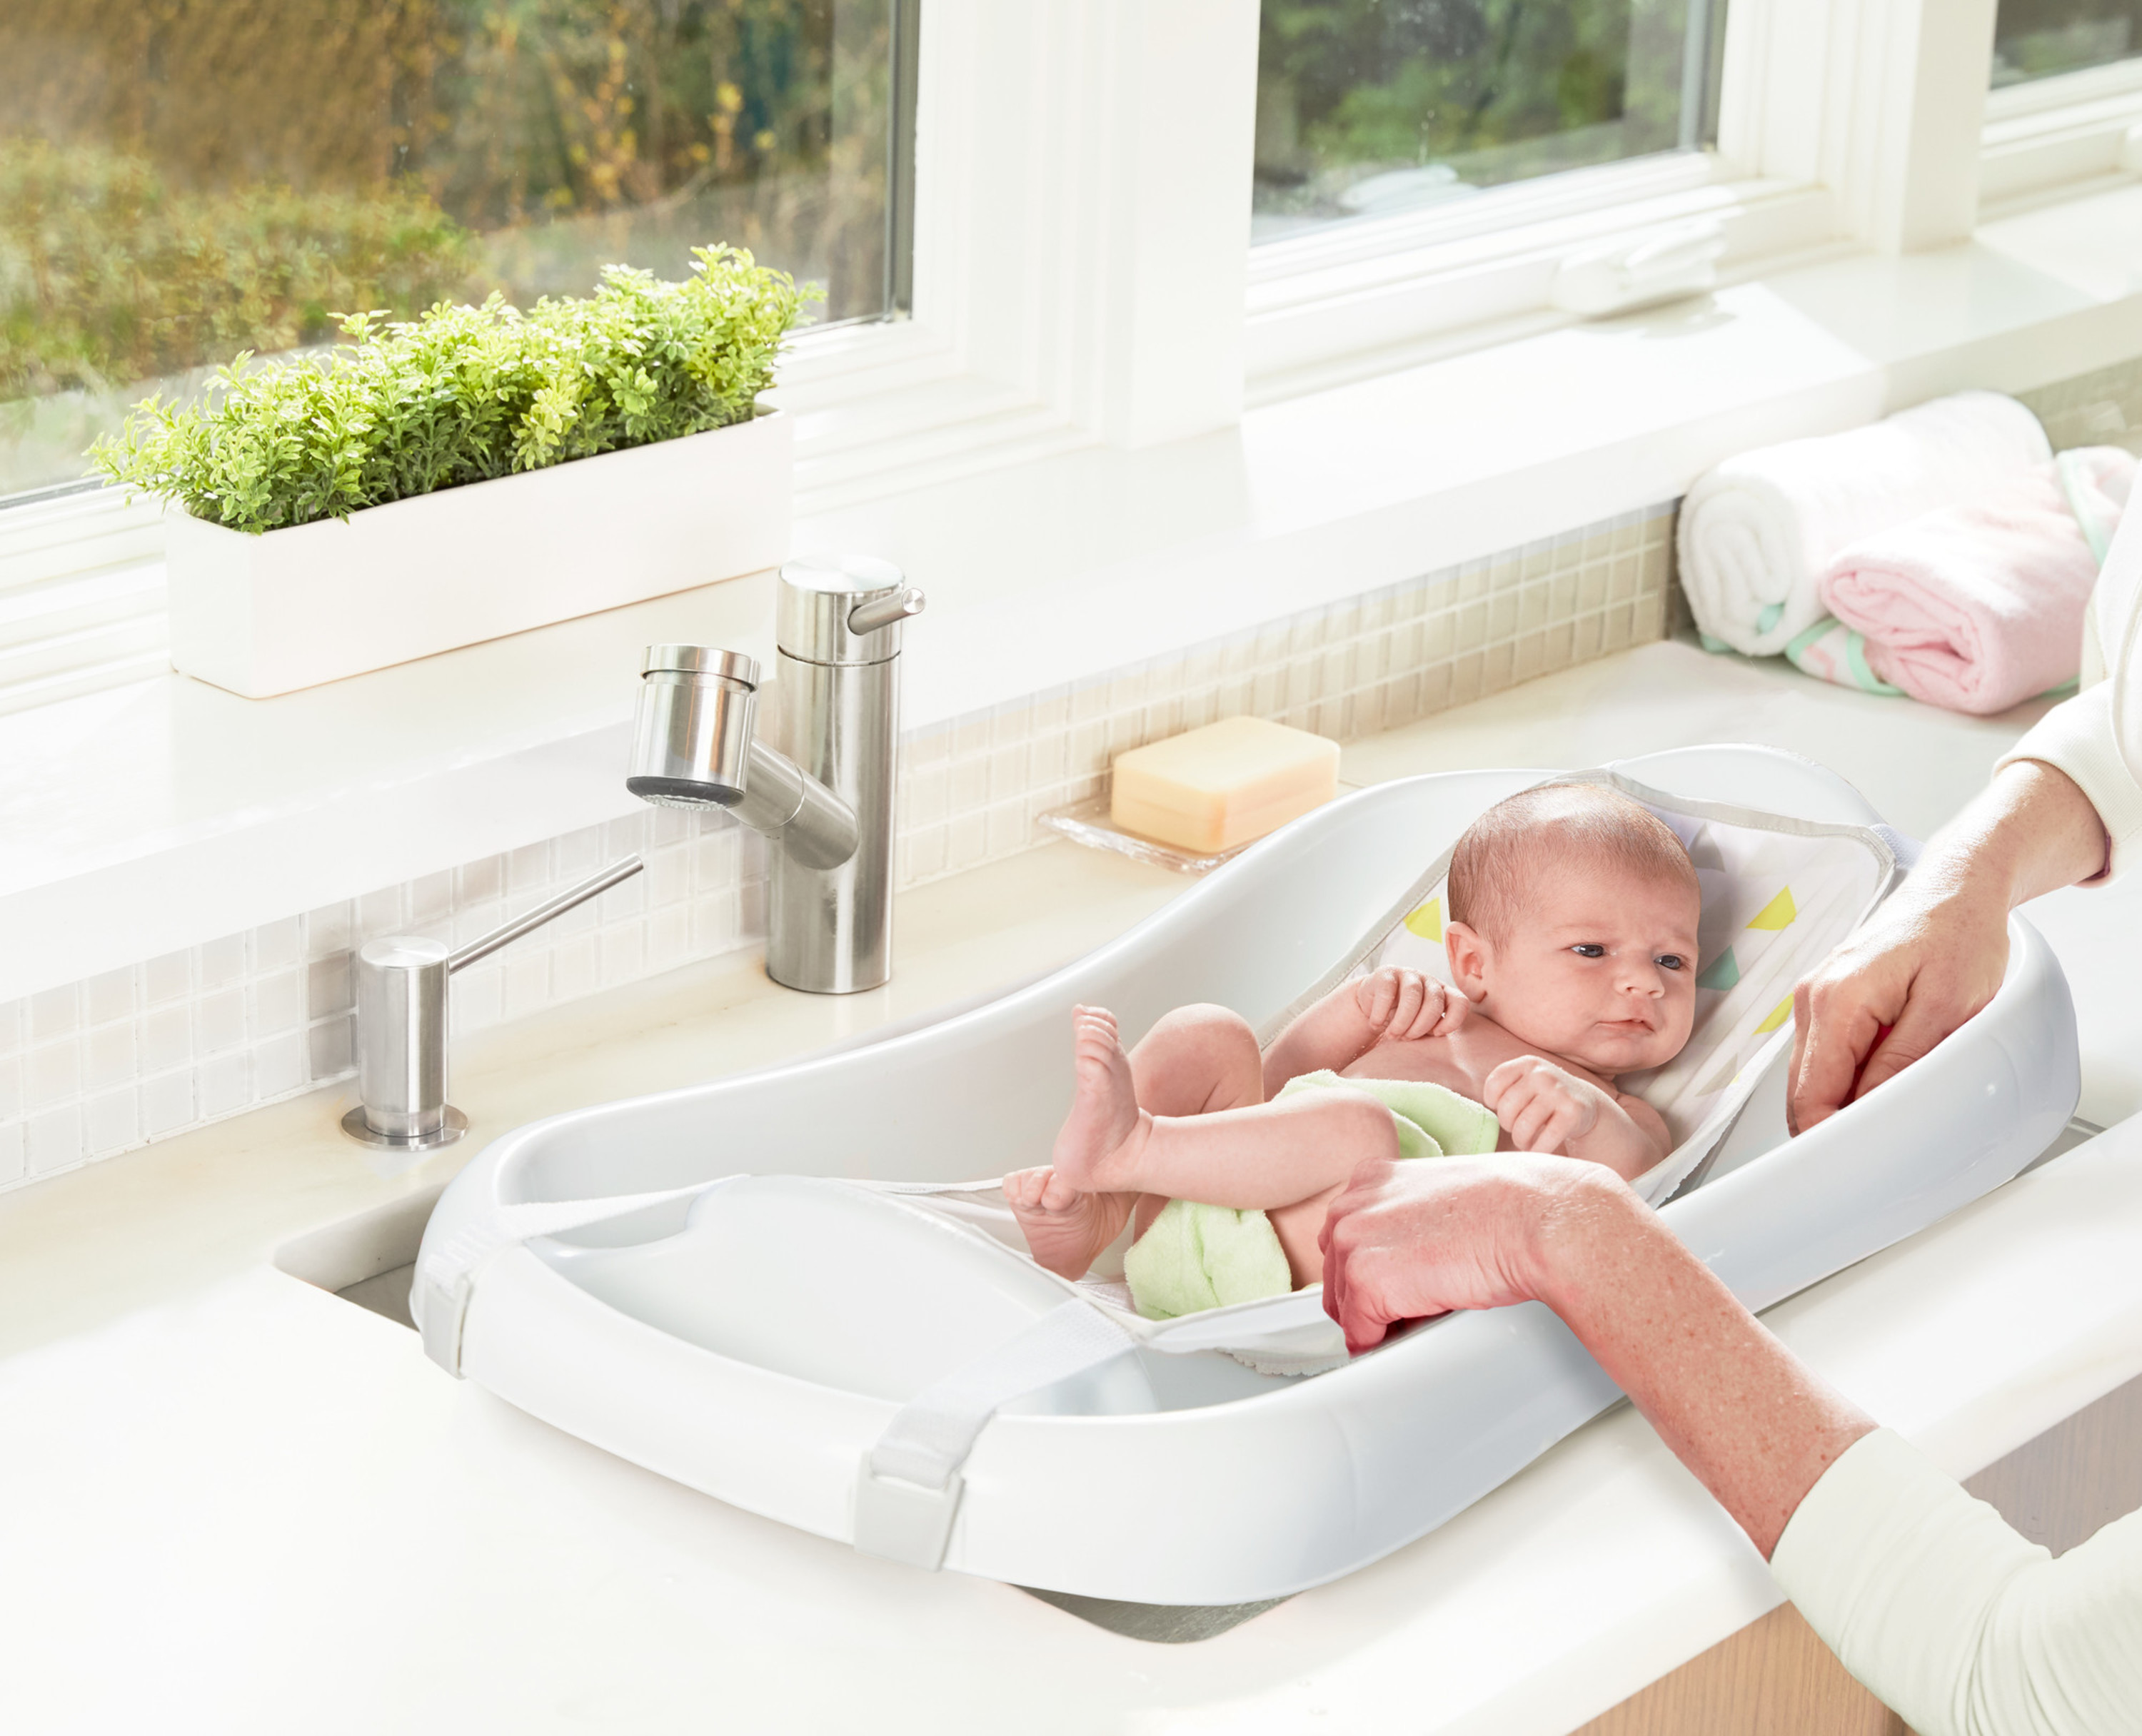 The First Years Sure Comfort Newborn to Toddler Tub, White - image 2 of 4